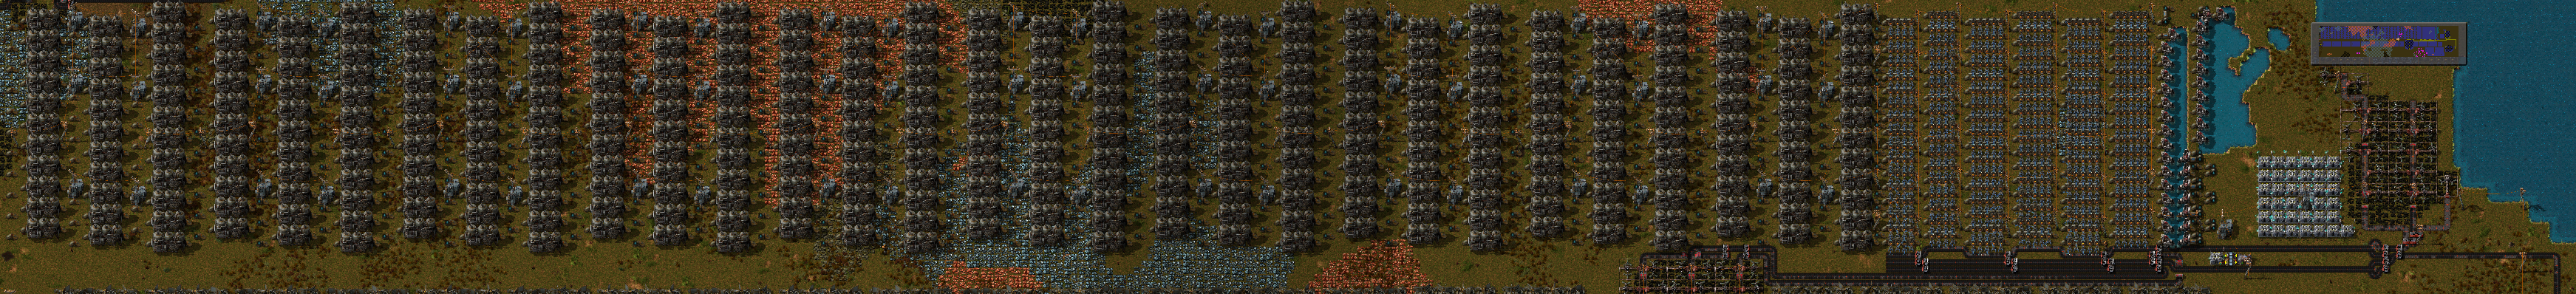 factorio-steam-all.png